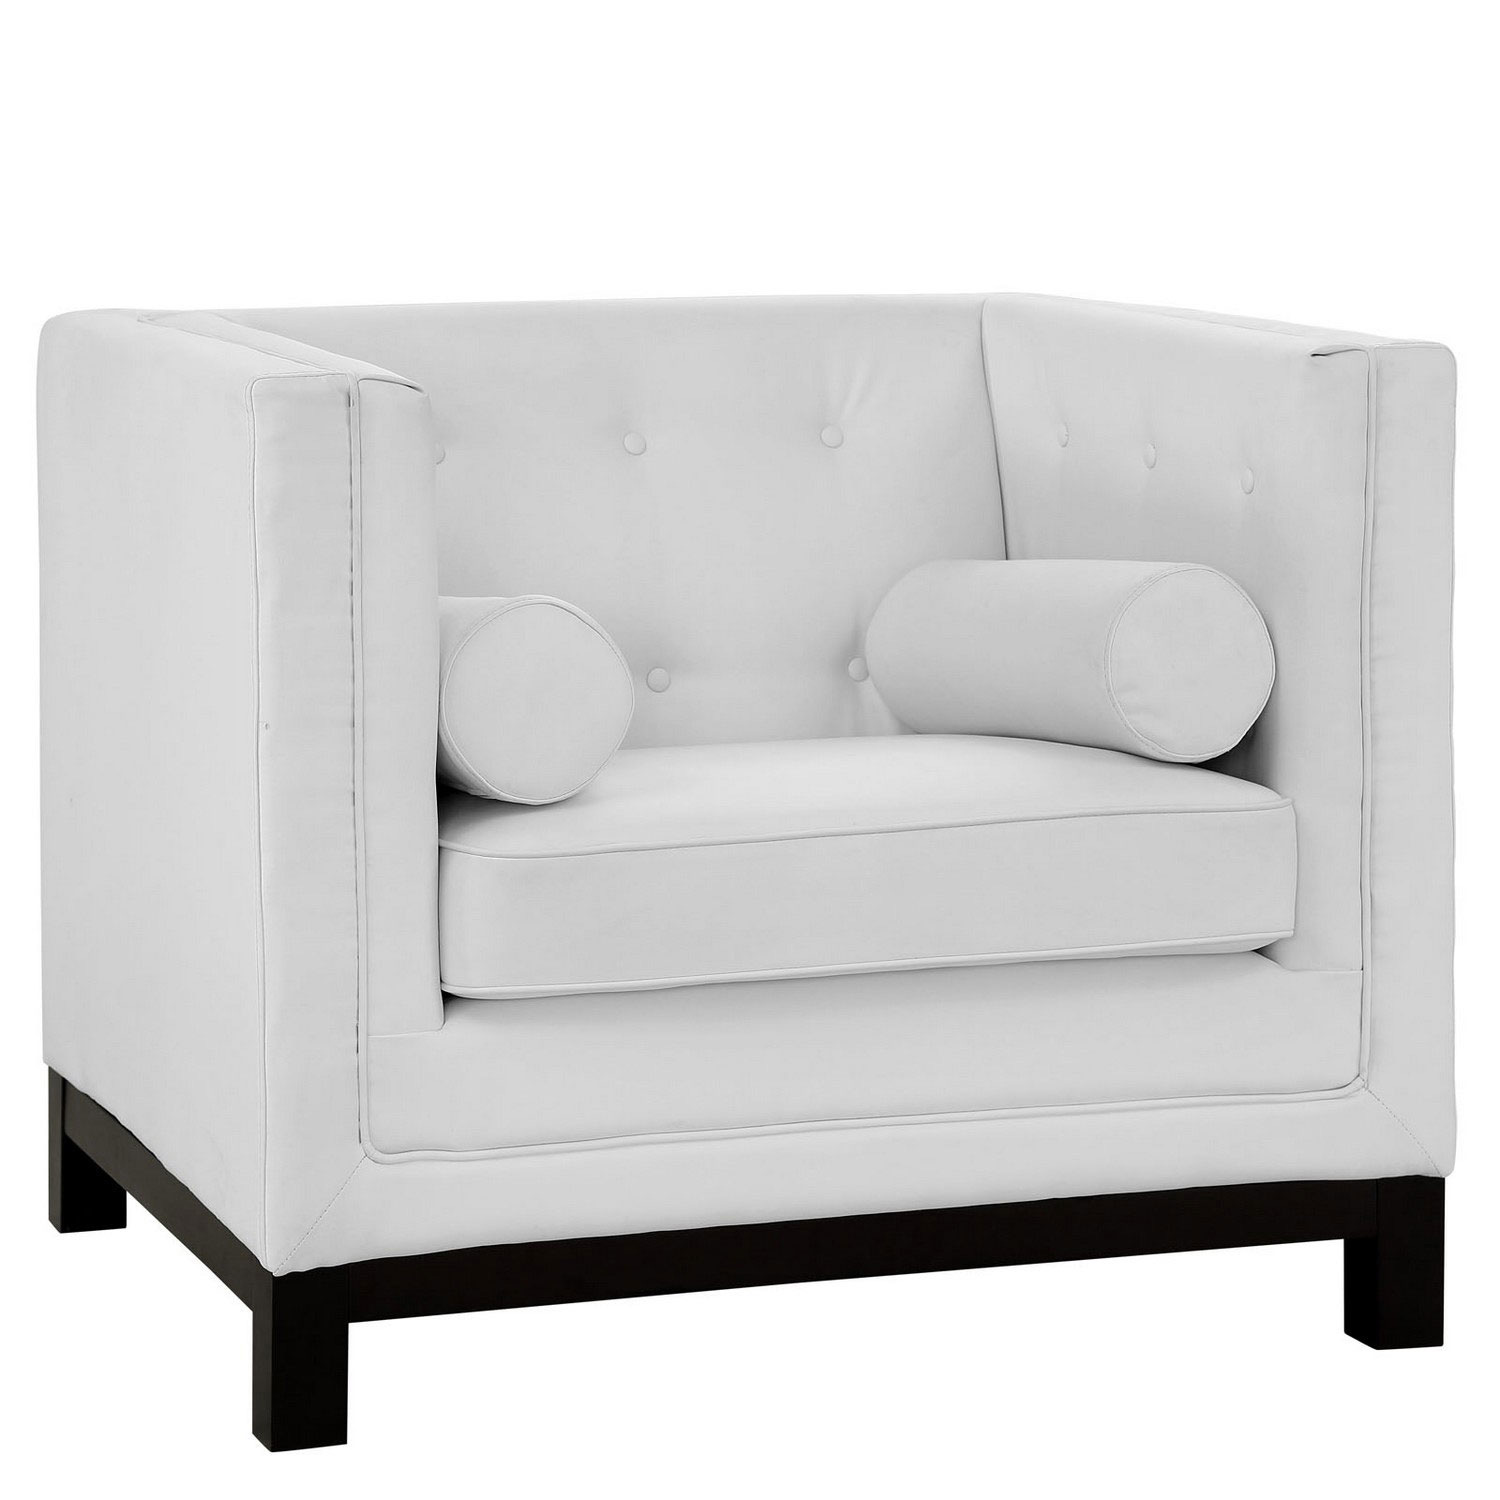 Modway Imperial 2 Piece Living Room Set - White